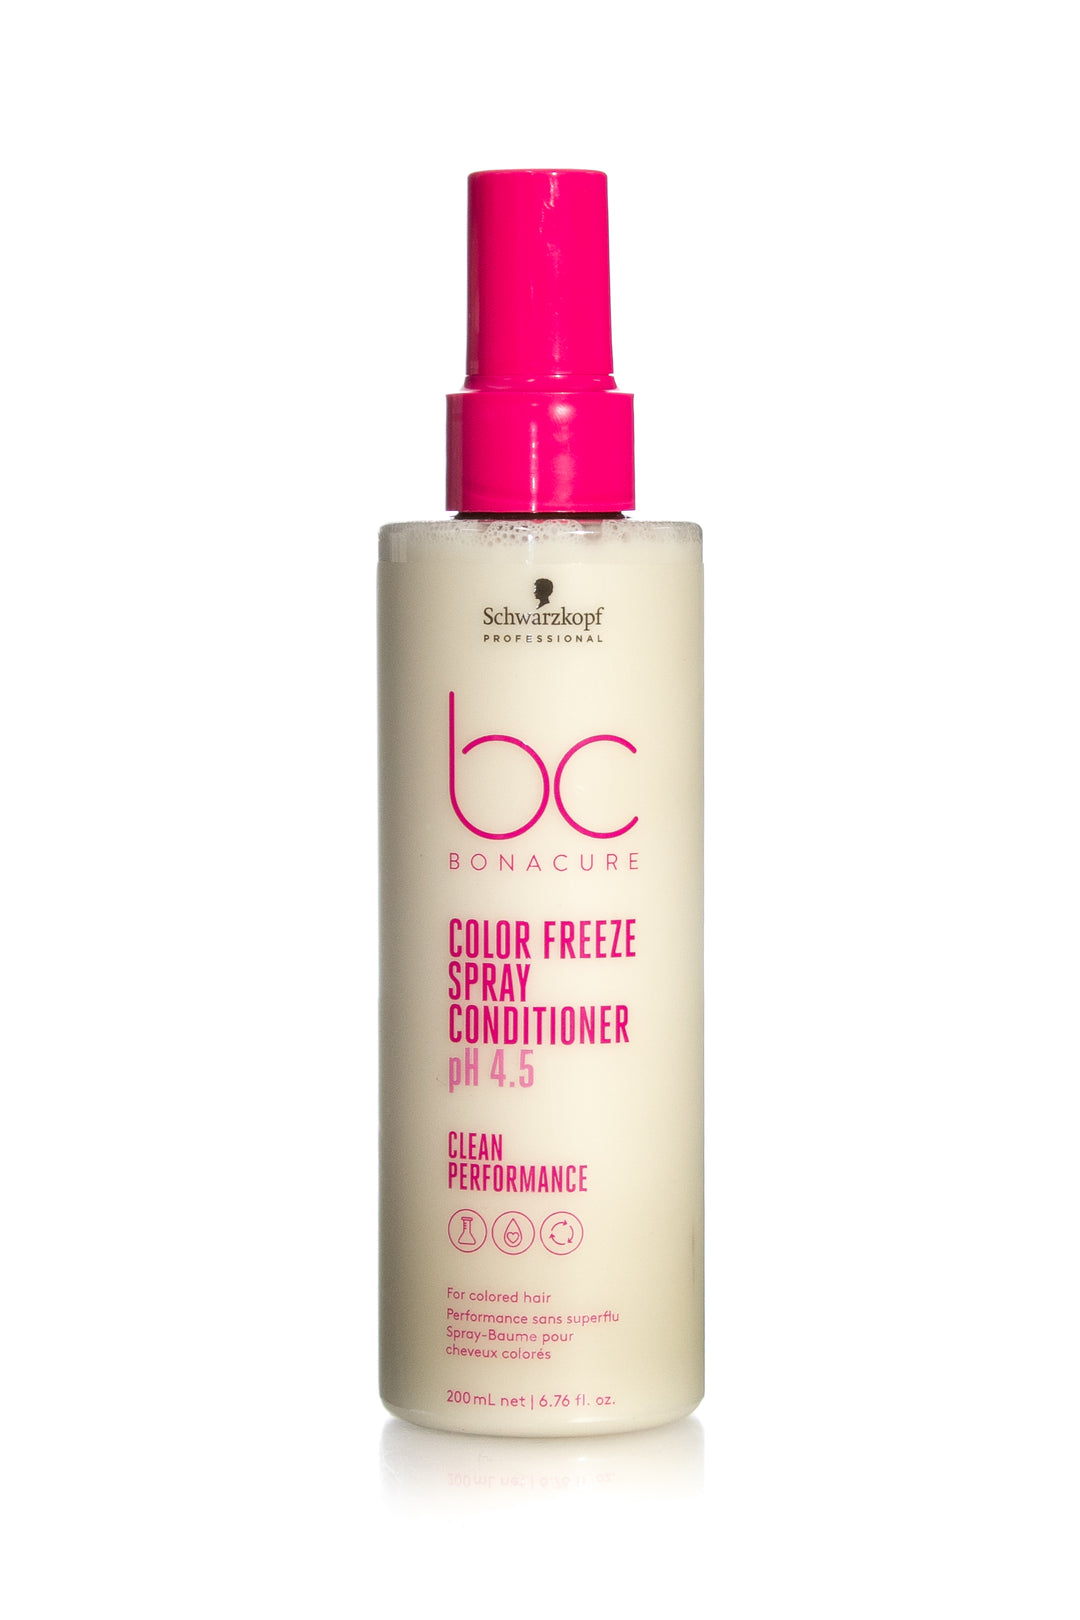 SCHWARZKOPF Clean Performance Color Freeze Spray Conditioner | Various Sizes